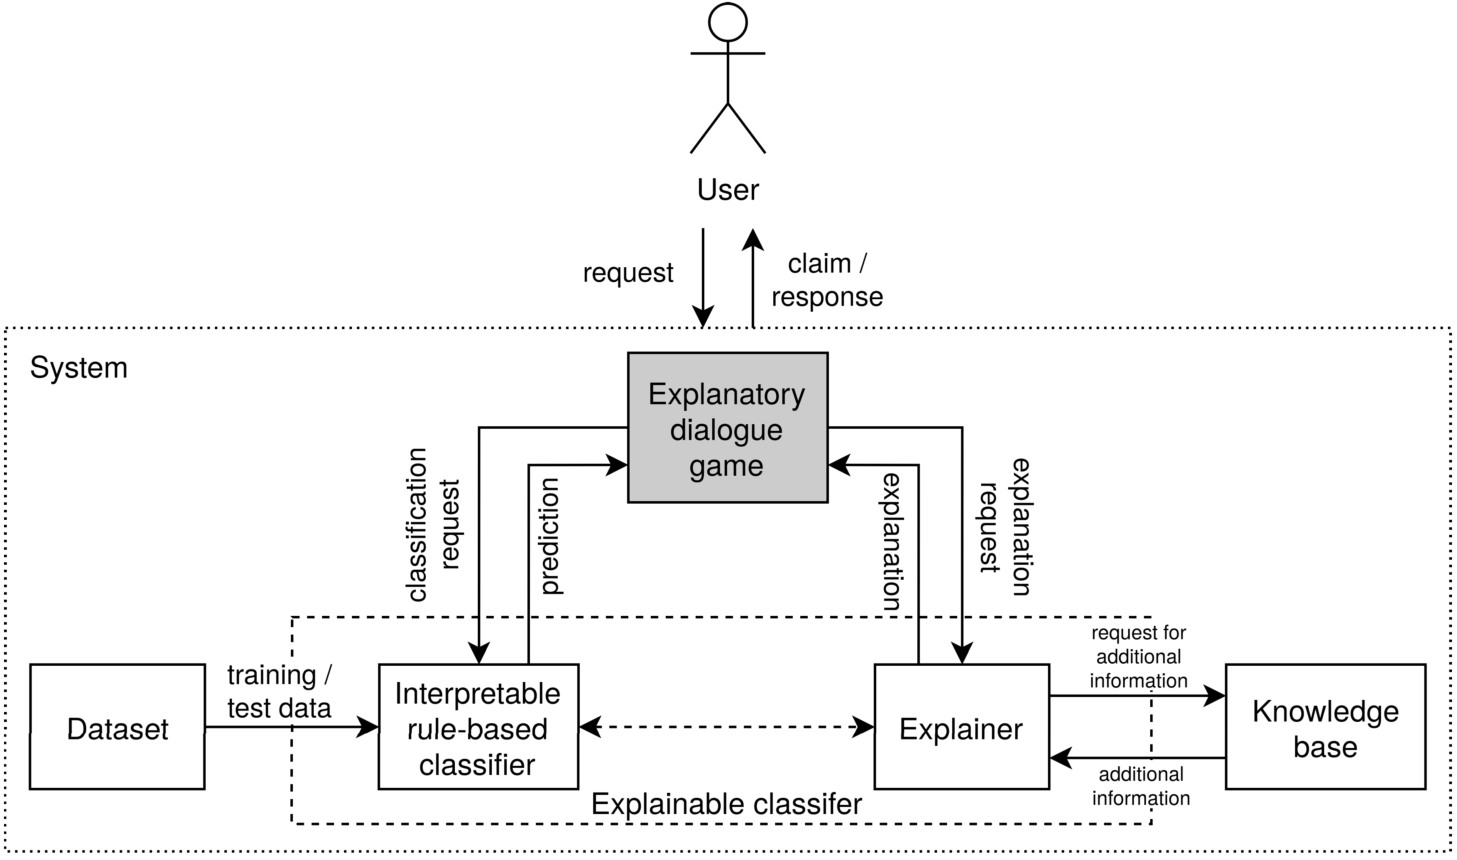 A schema of the modelled system-user explanation communication process. This paper focuses on designing an explanatory dialogue game for communication of factual and counterfactual explanations for interpretable rule-based classifiers (the shaded block).